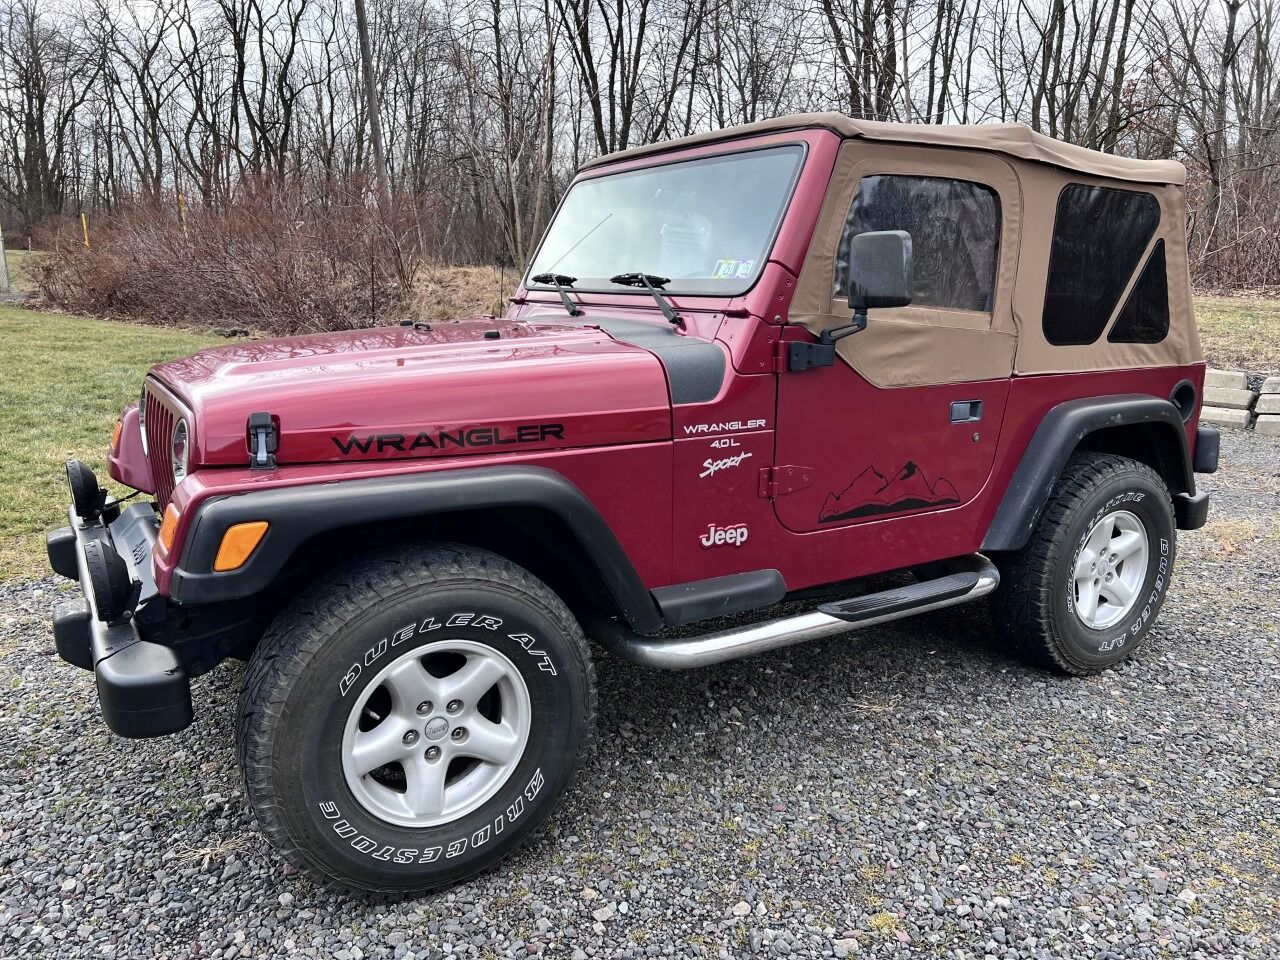 2000 Jeep Wrangler For Sale In Selinsgrove, PA ®